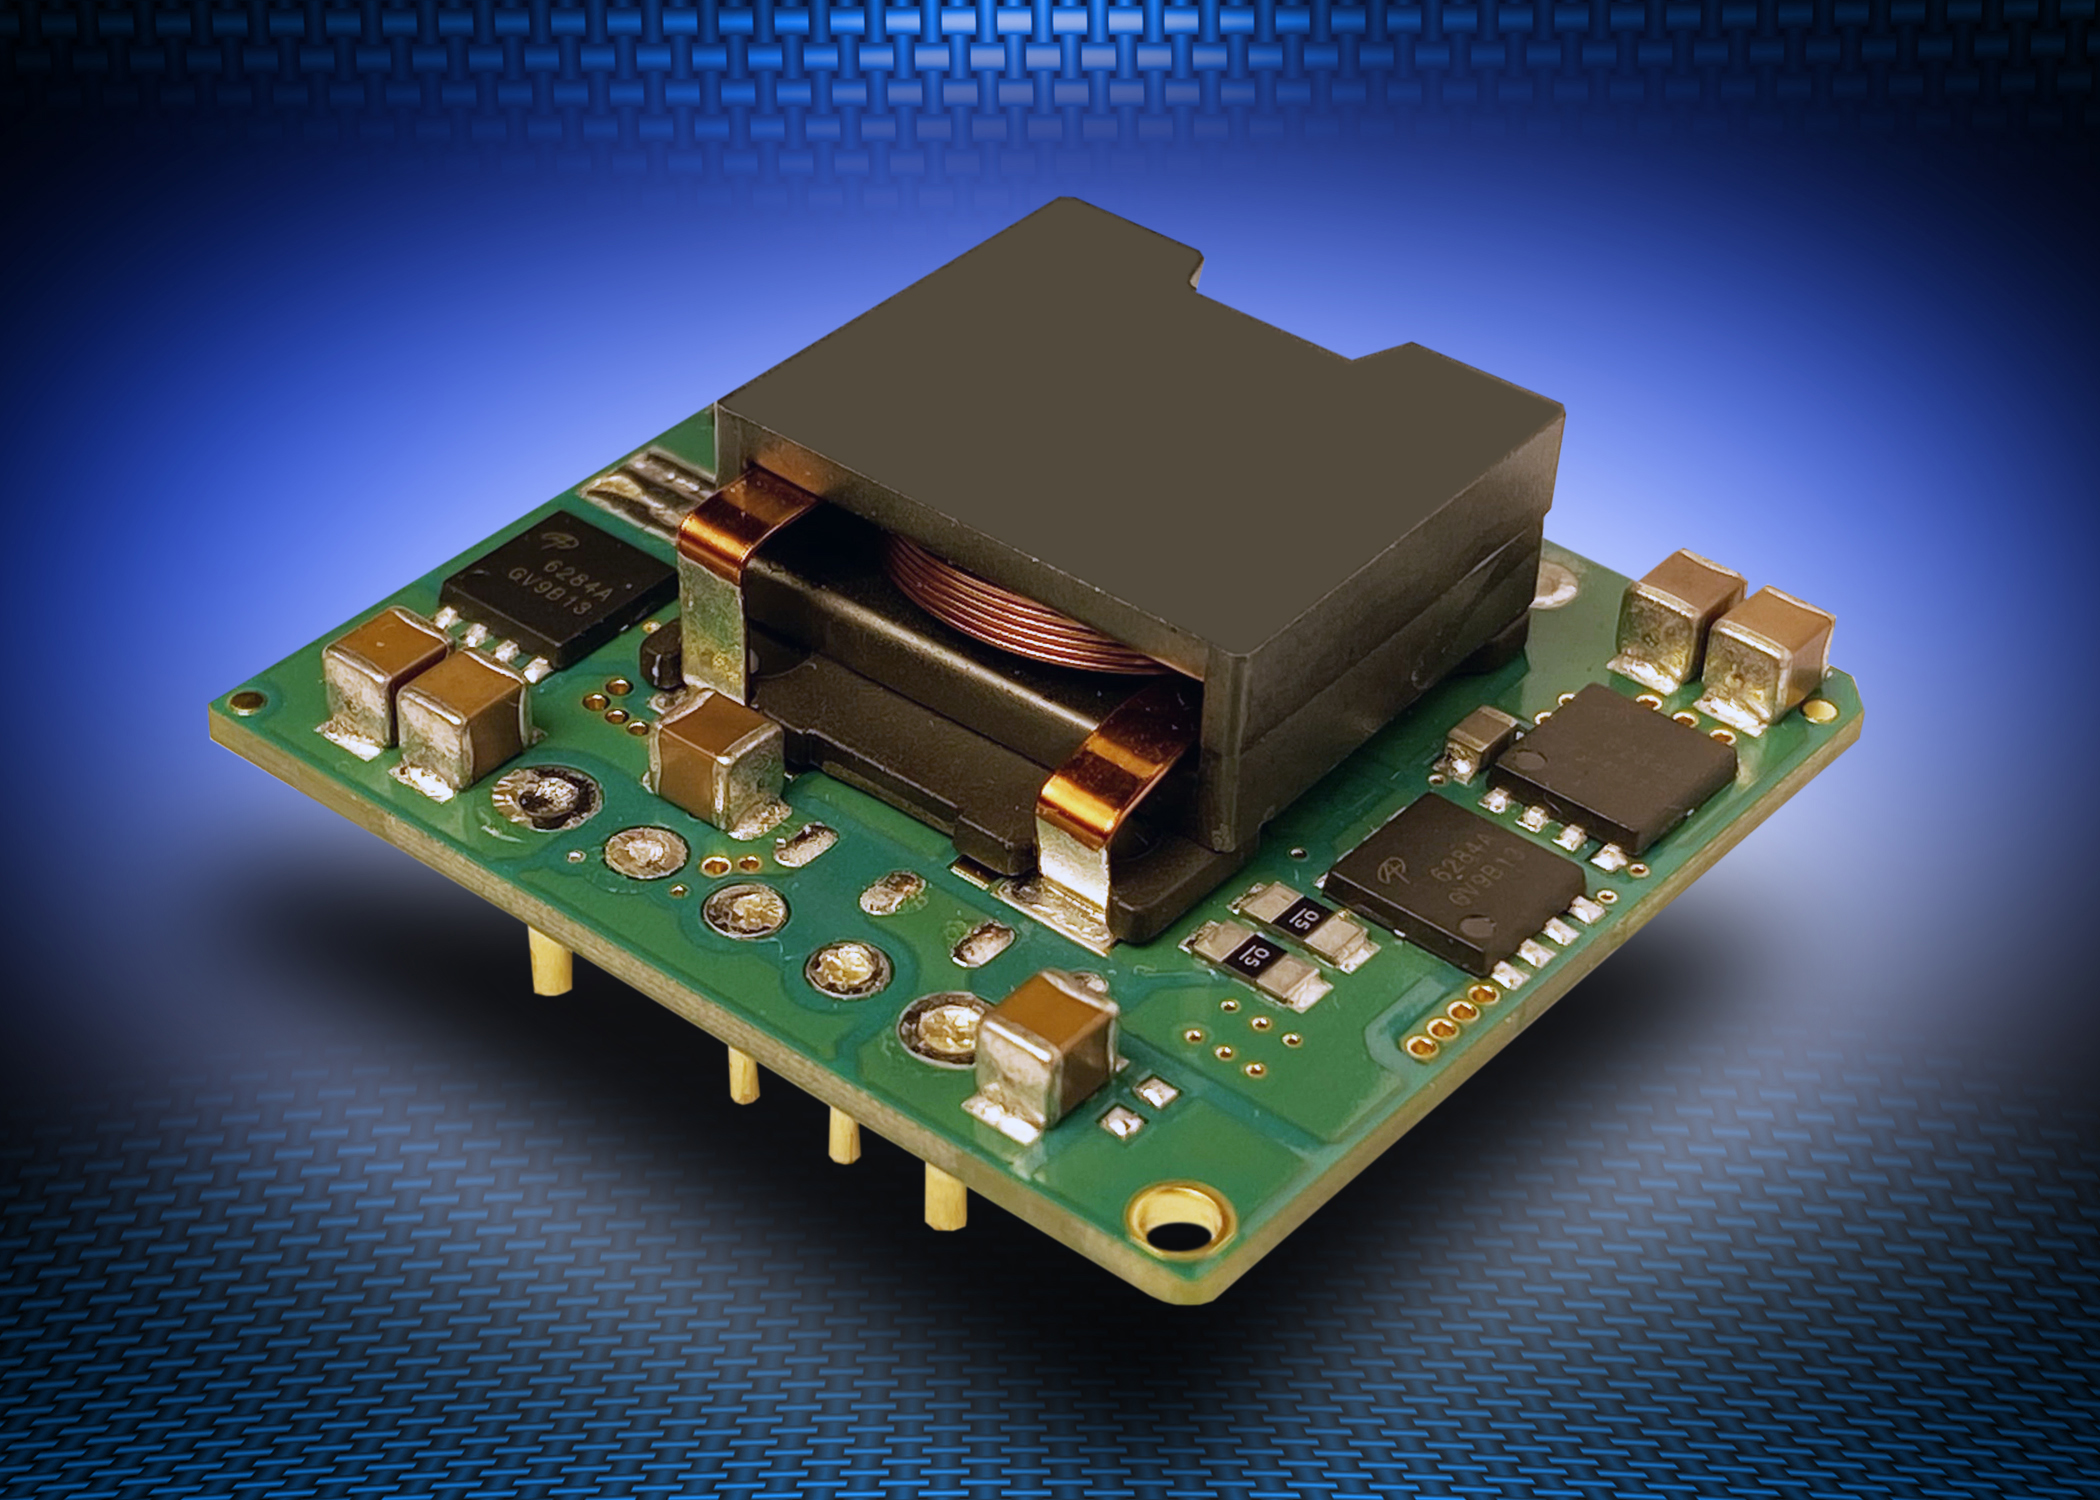 Buck-Boost DC-DC Converters Have Output Adjustment to 48V